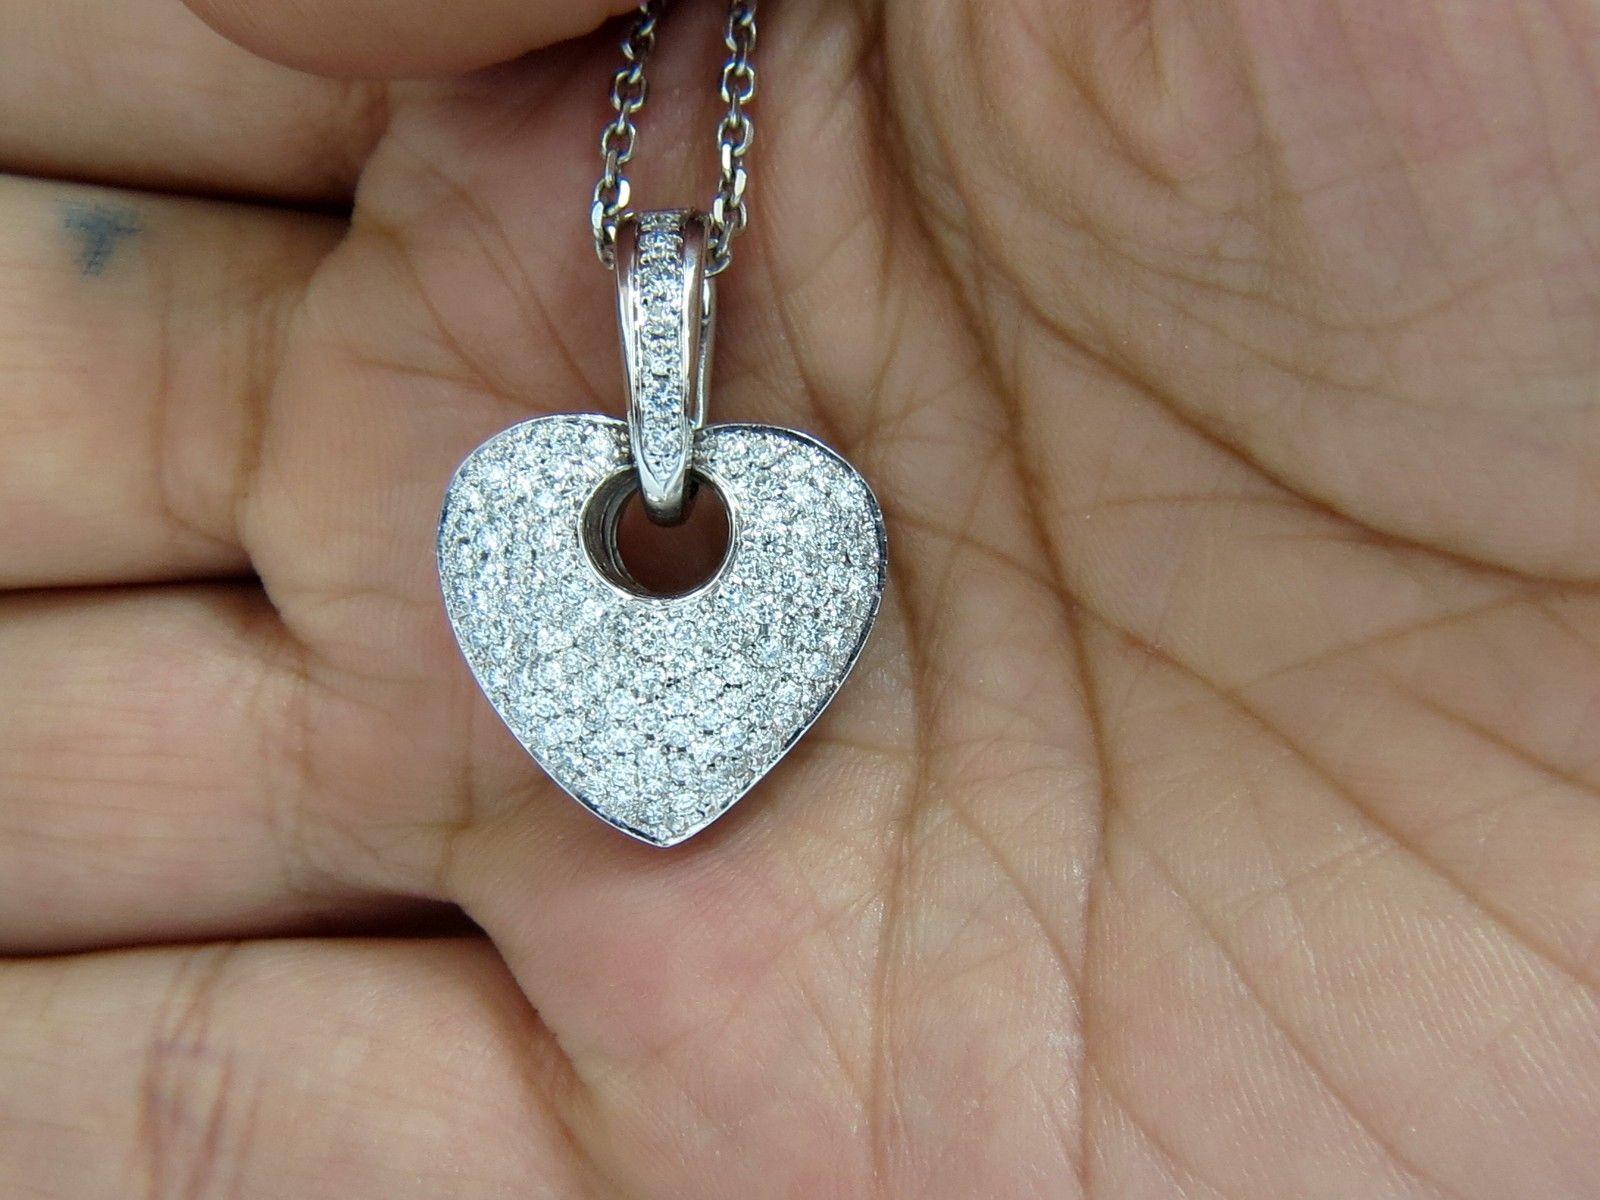 Modified heart design

Dangles on Bale.

Excellent diamonds bead set.

1.85ct.

F/G color, Vs-2 clarity

14kt. white gold

& 

14kt white gold necklace

pendant measures:

26mm long (with bell)

20mm wide

16 inches necklace

$6000 appraisal to